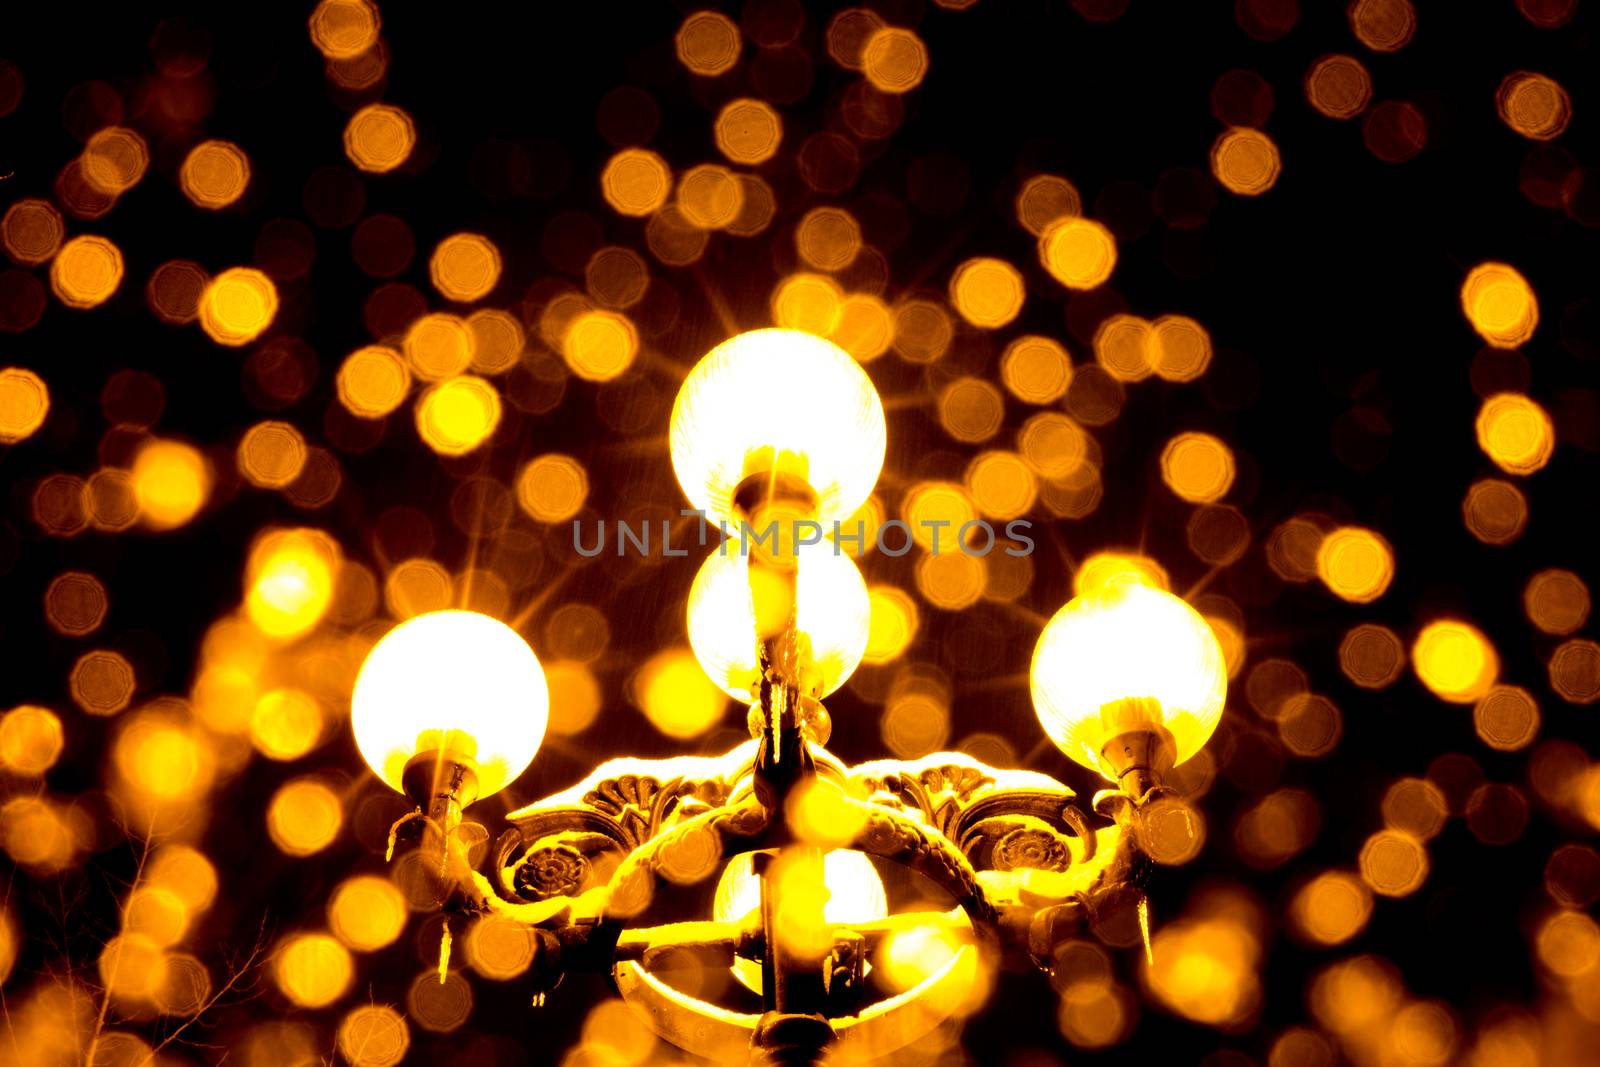 Antique yellow lantern at night with blurred snow flakes falling down